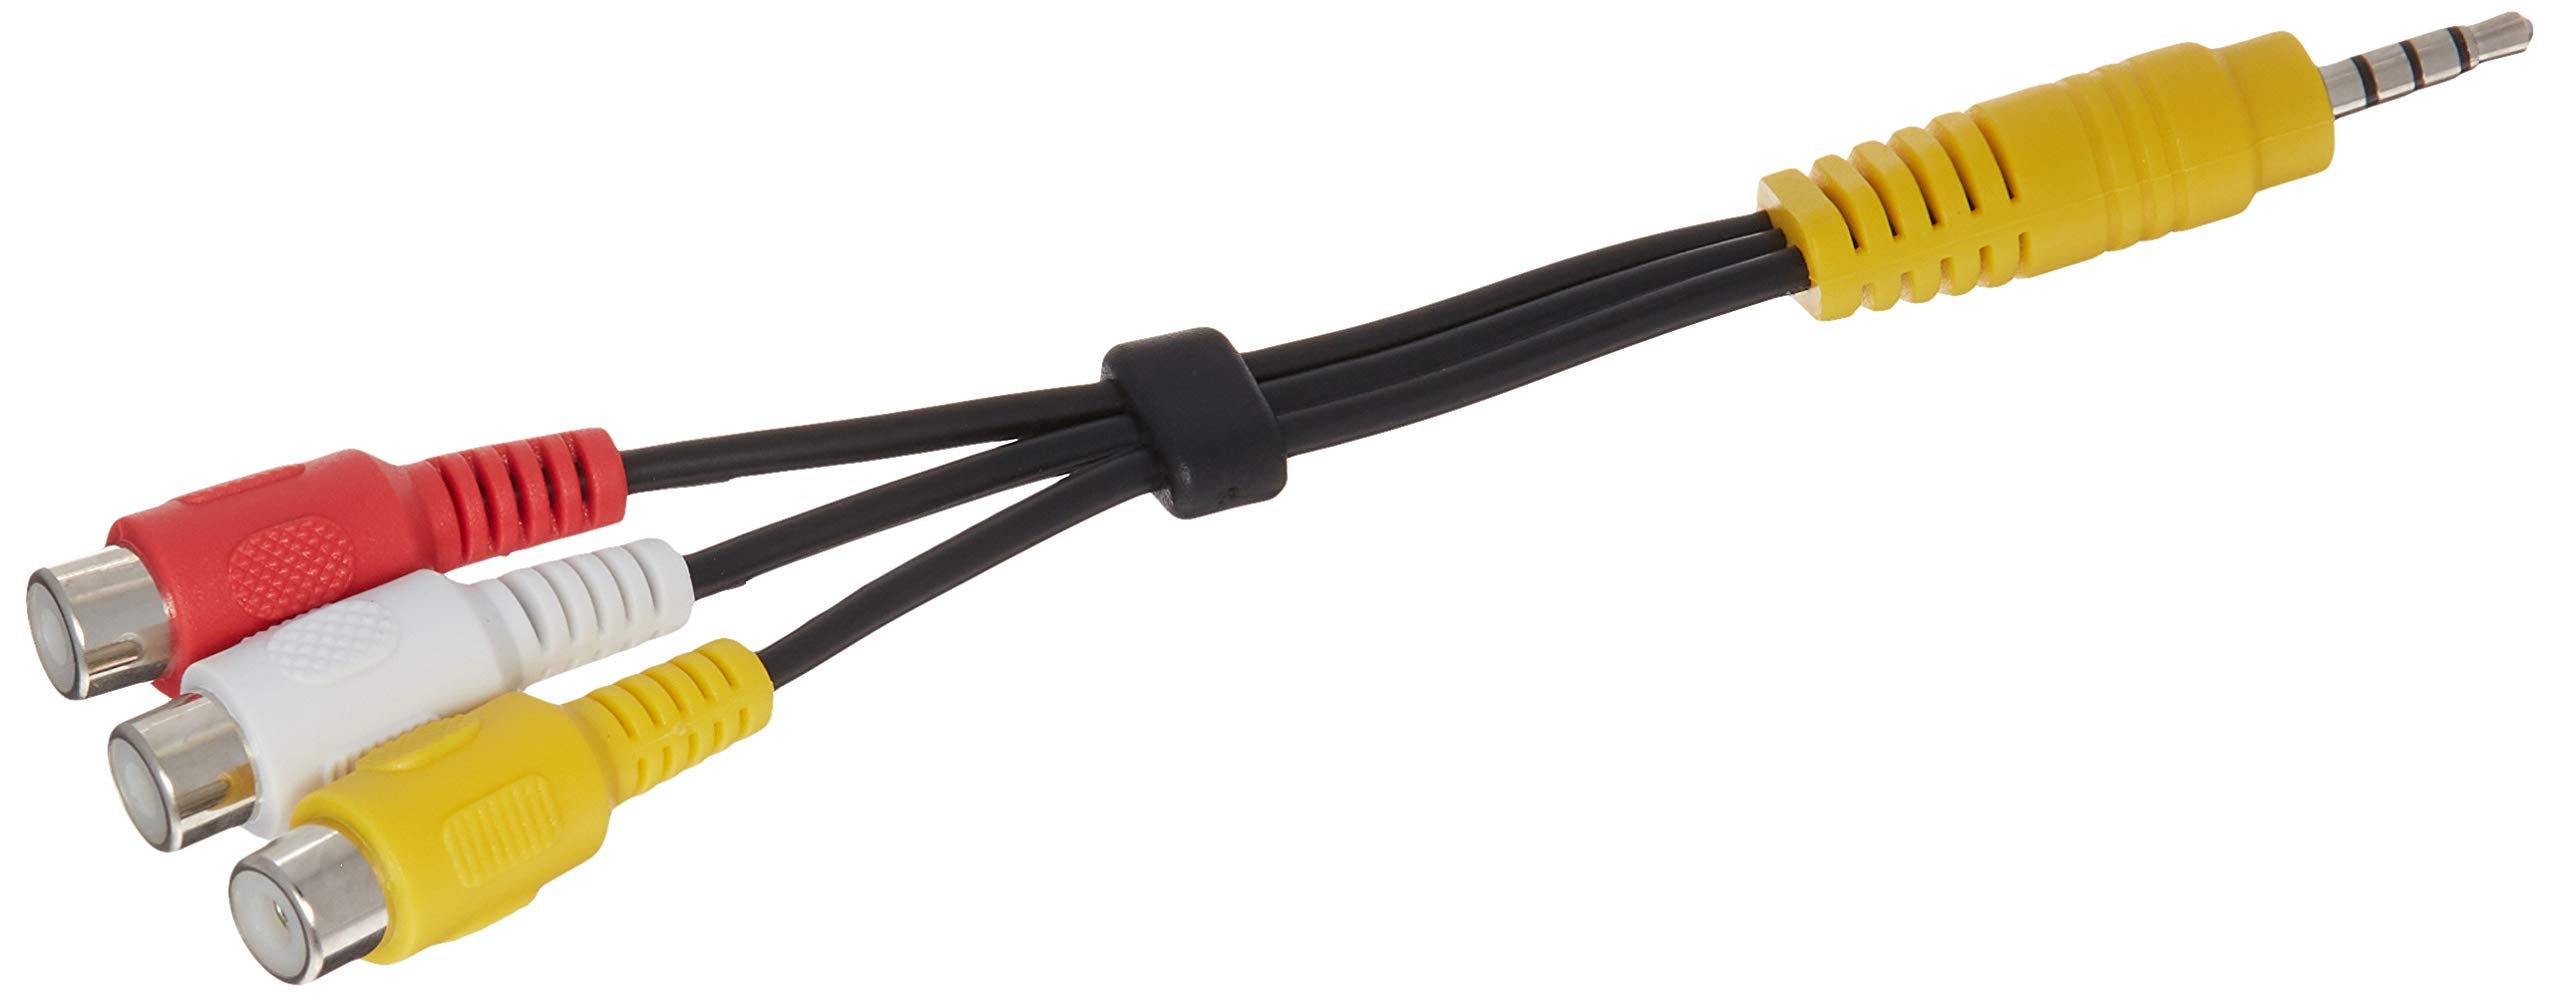 LG 050-01667 Cable